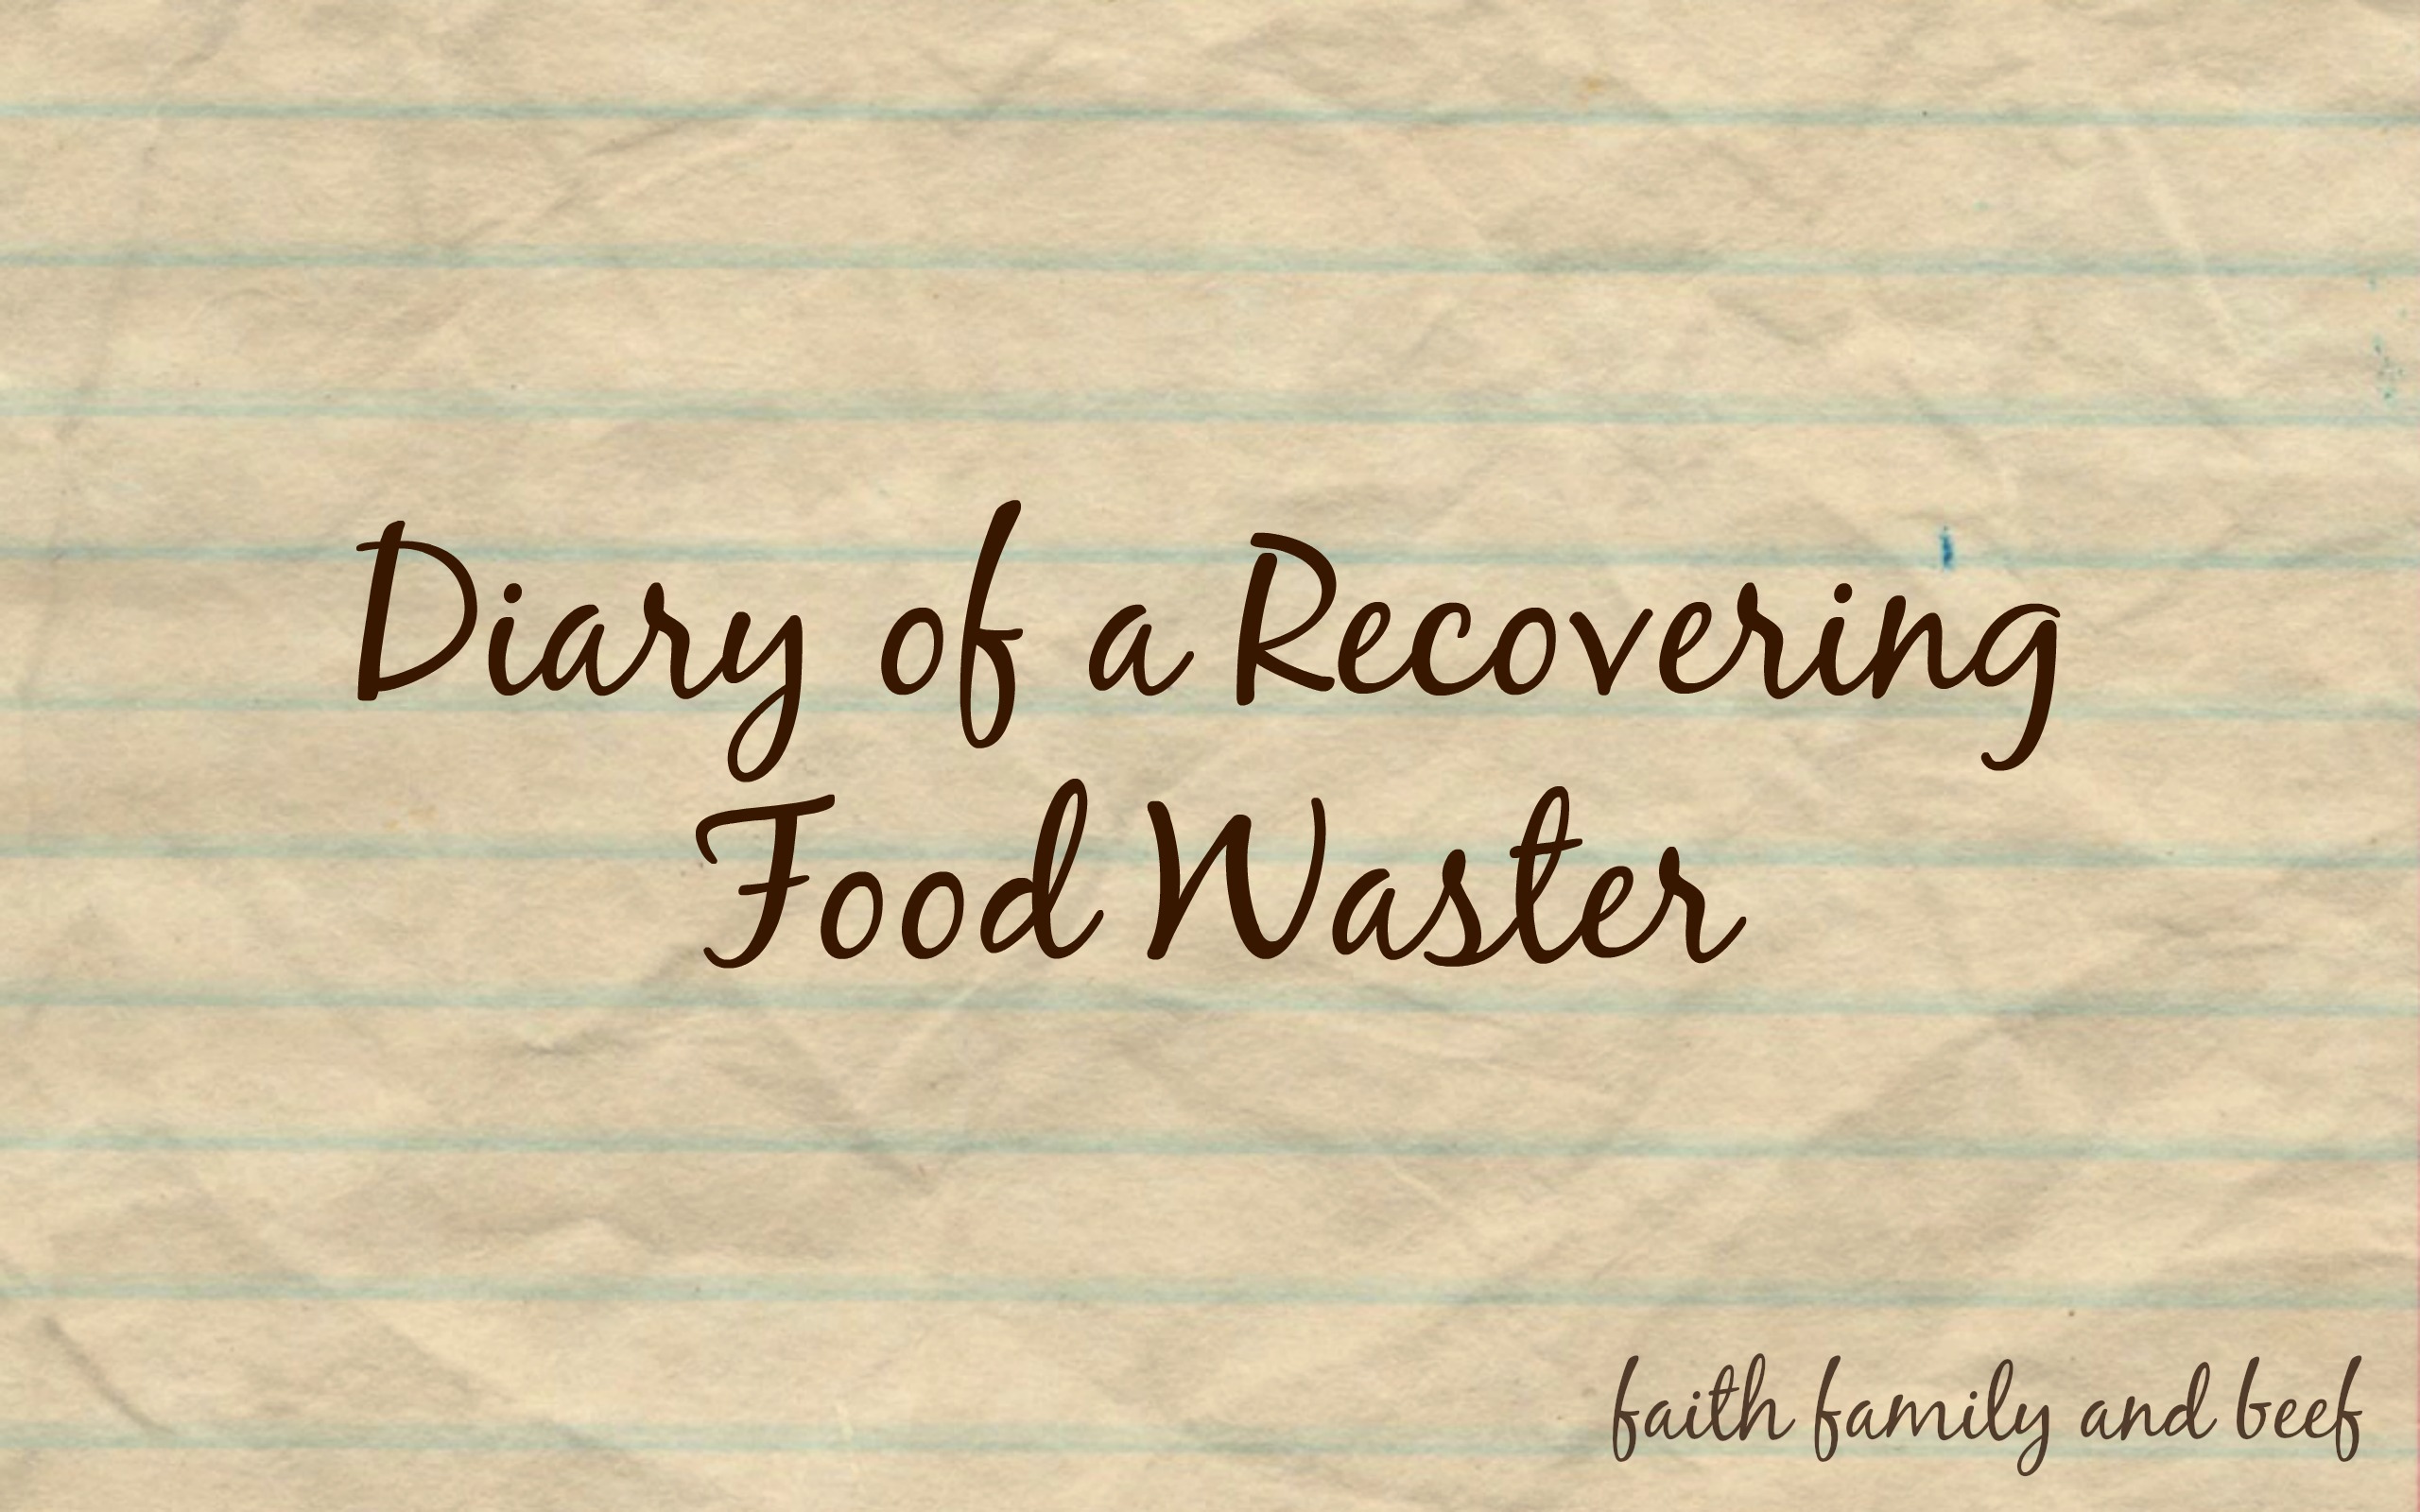 Diary of a Recovering Food Waster – Part 3